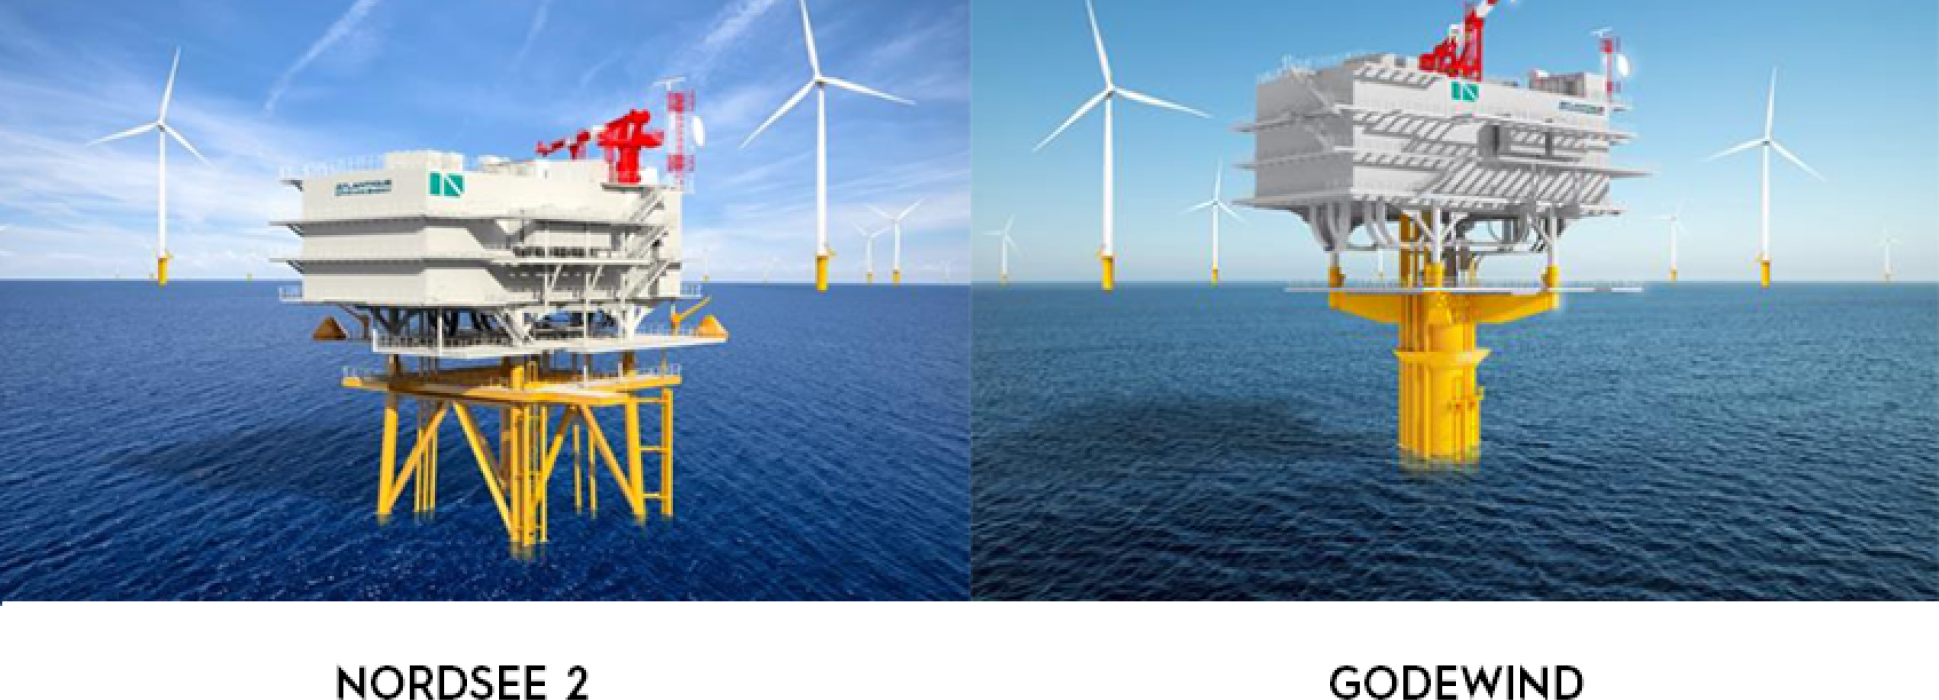 Atlantique Offshore Energy signs an important contract with the German energy company RWE